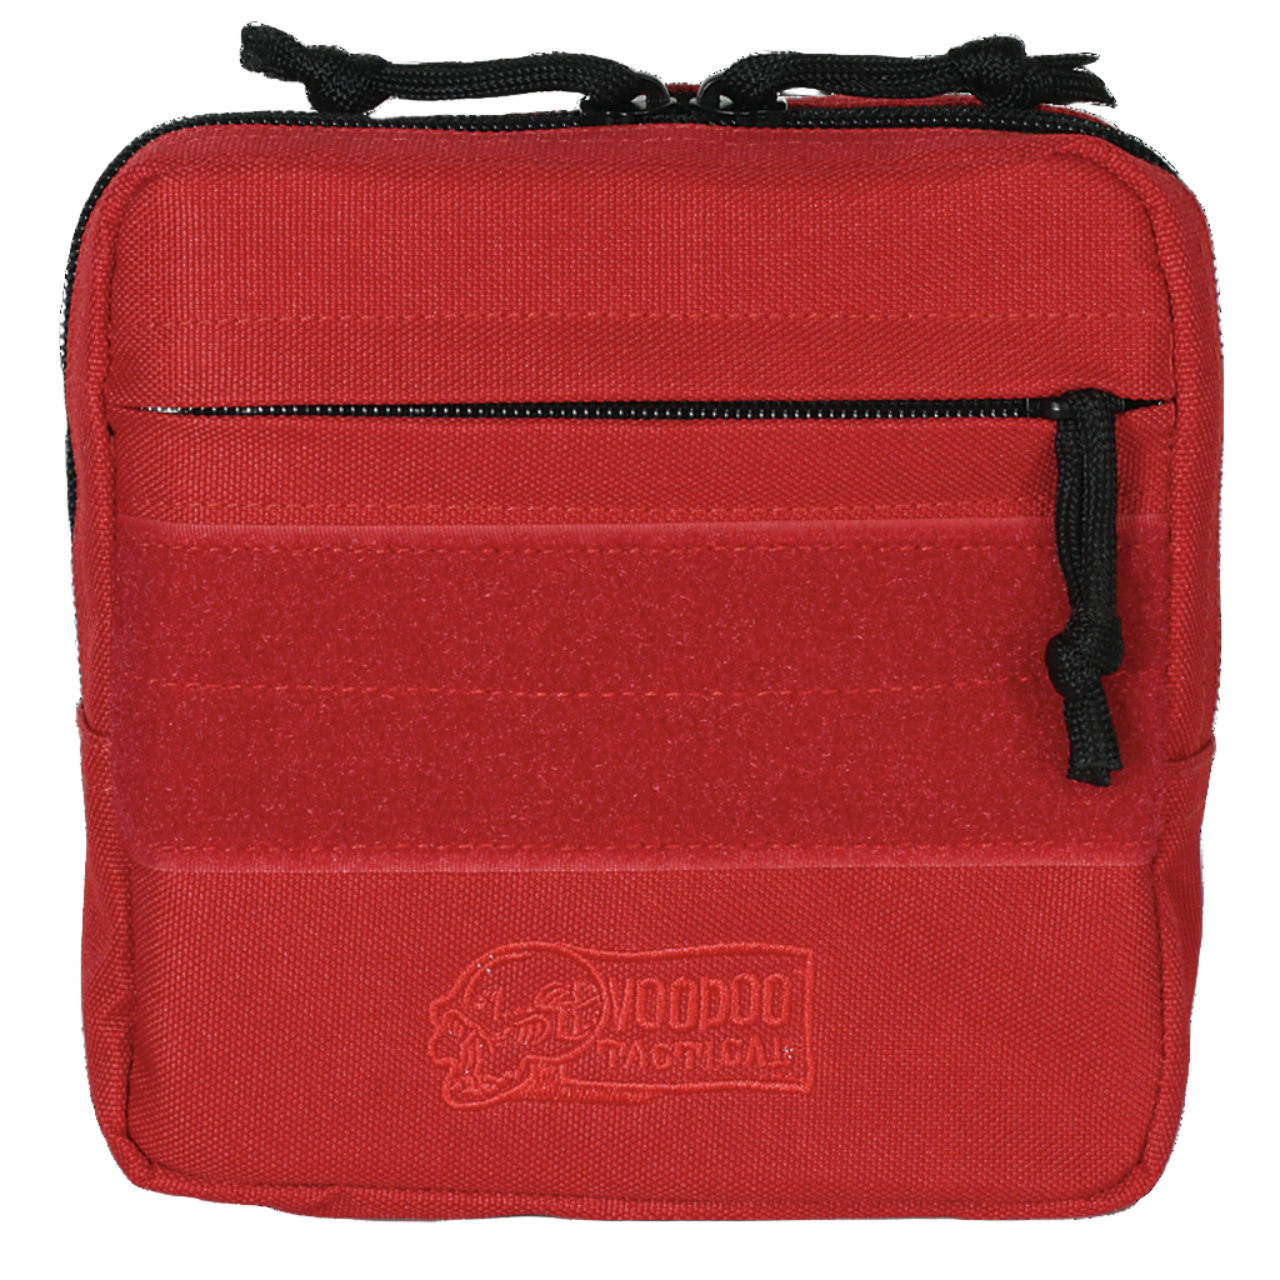 Medical Pouches - Voodoo Tactical First Aid Pouch